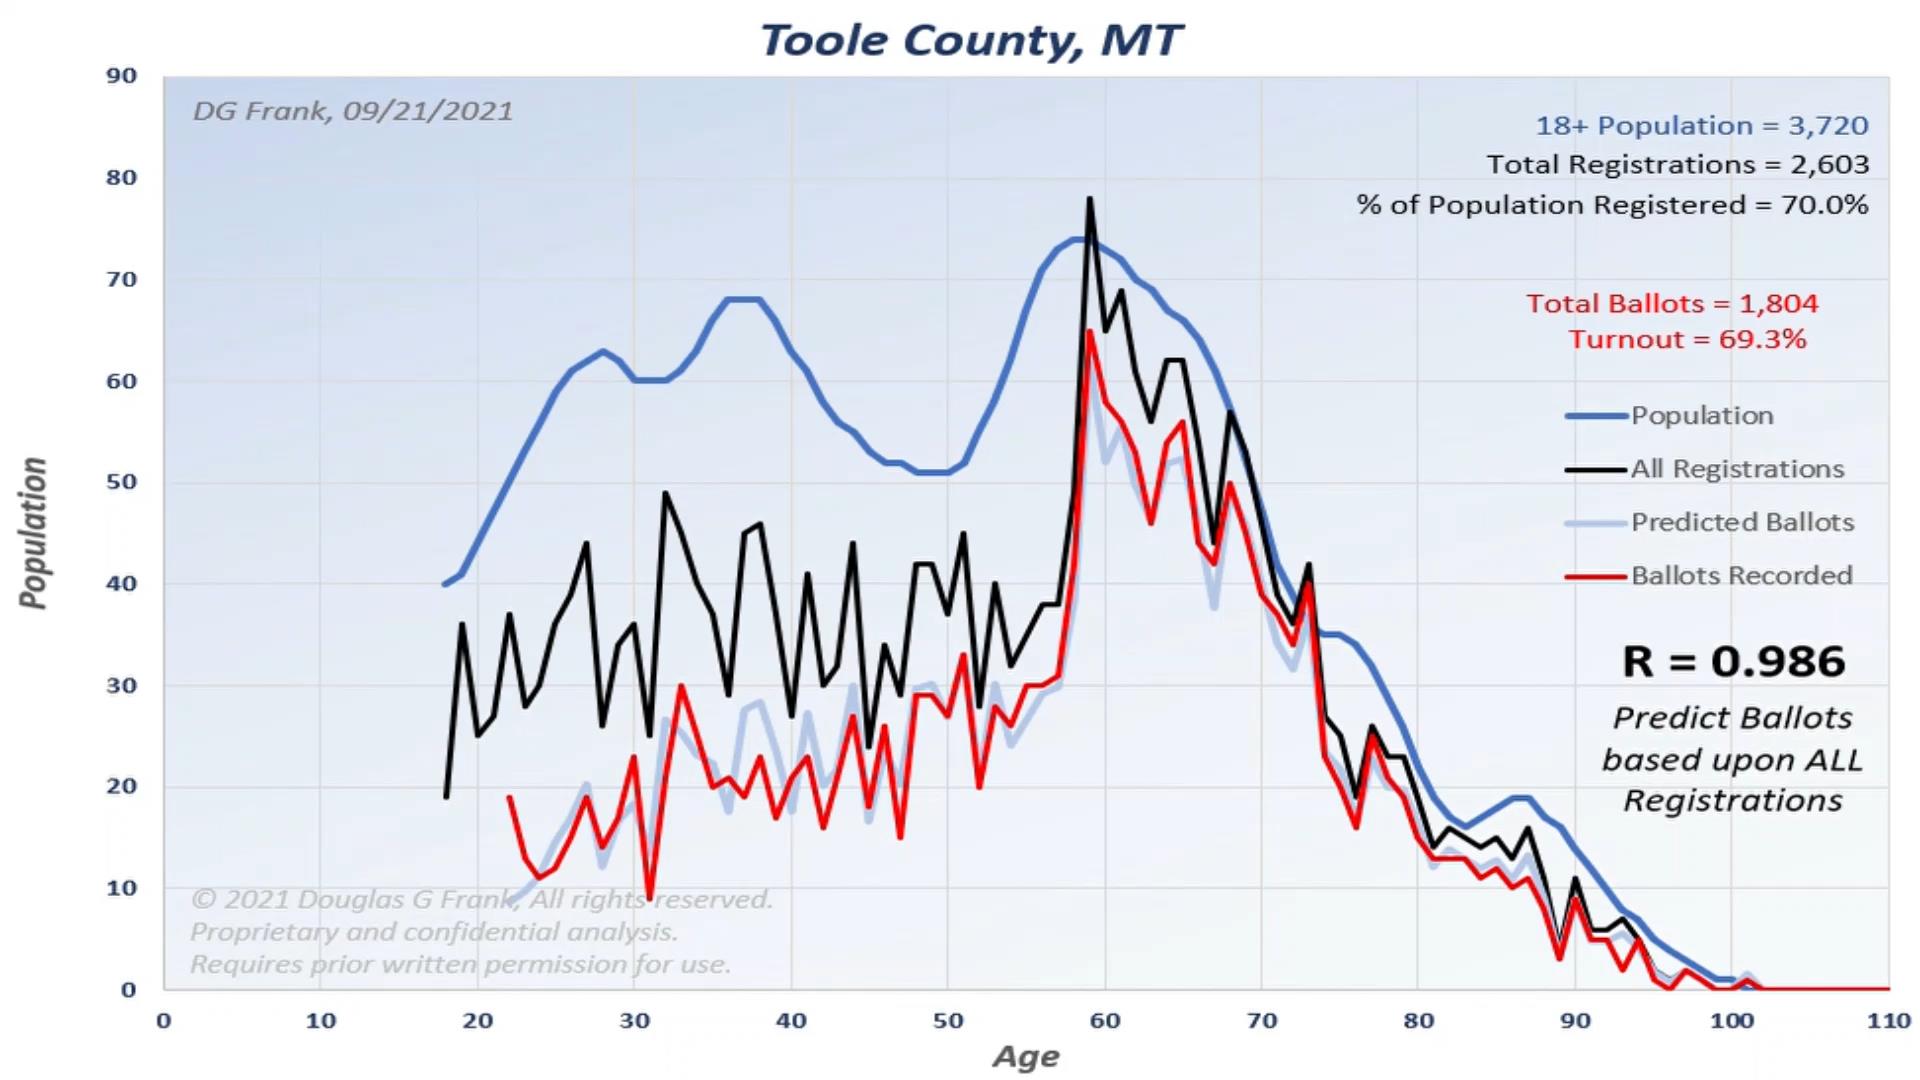 Toole County 2020 Election Analysis Chart by Dr. Doug Frank